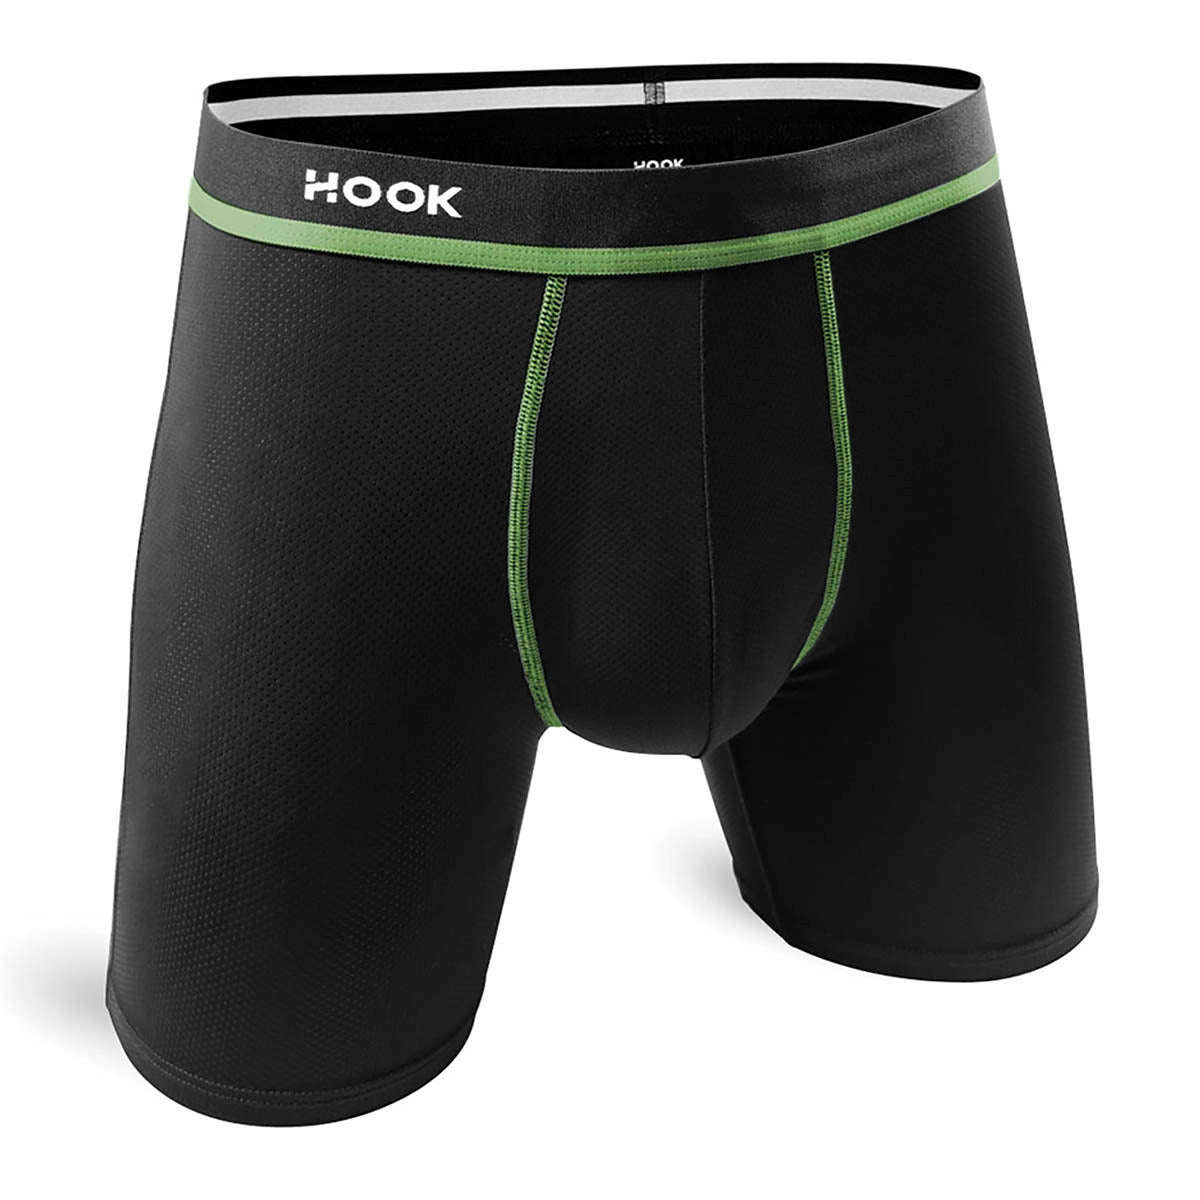 Boxer Hook Freedom Renew Black and Green